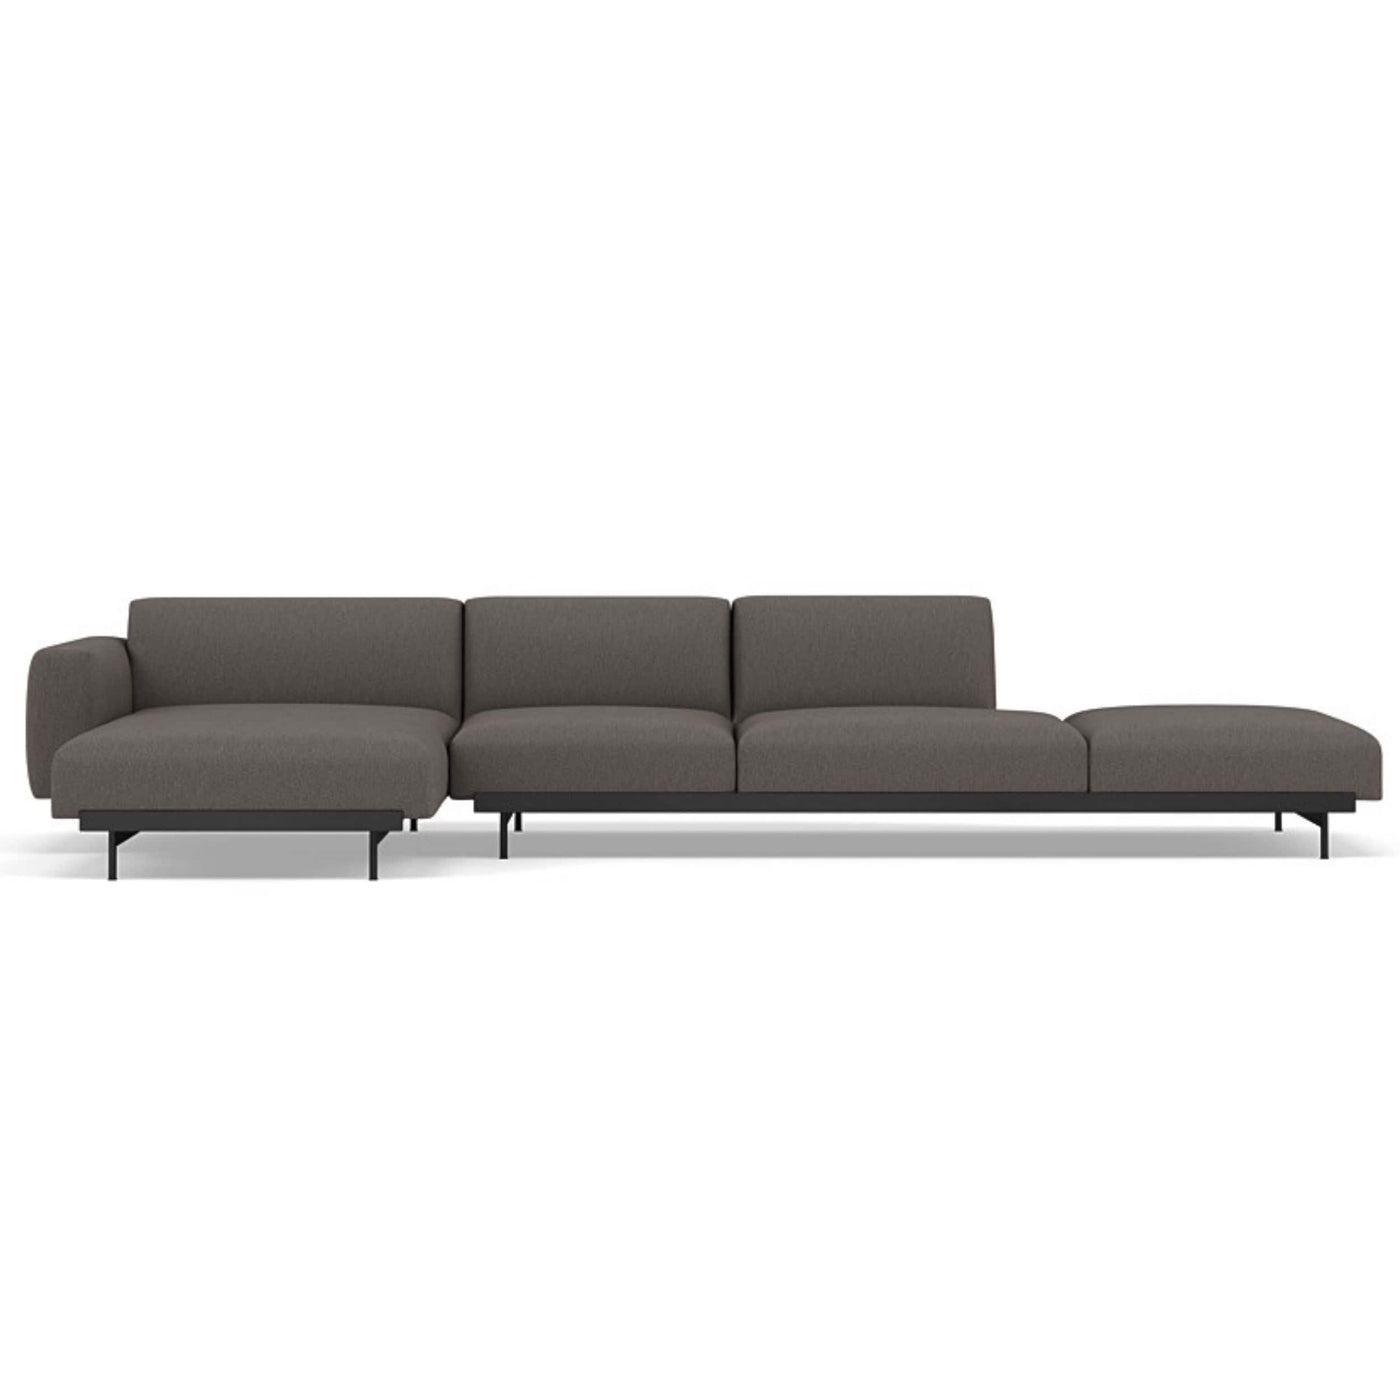 Muuto In Situ Modular 4 Seater Sofa configuration 5. Made to order from someday designs. #colour_clay-9